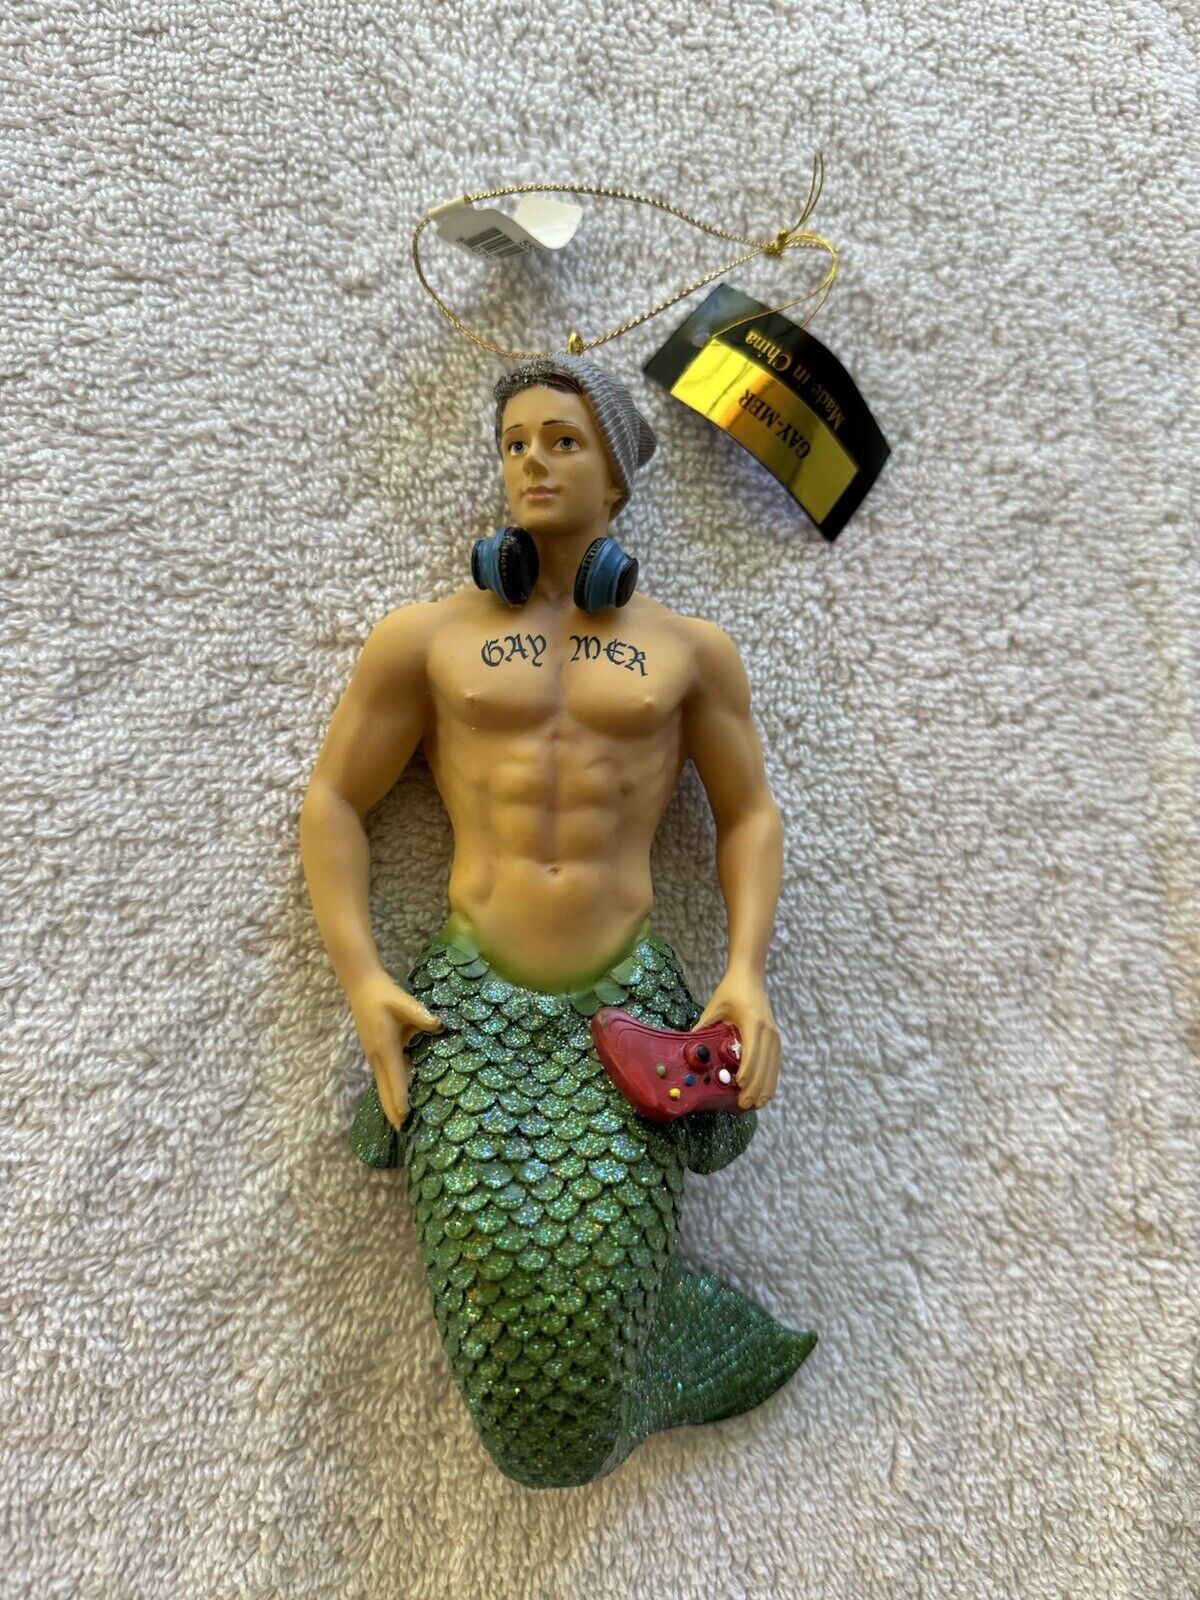 RARE RETIRED December Diamonds Merman GAYMER 2019, WITH BOX AND TAGS